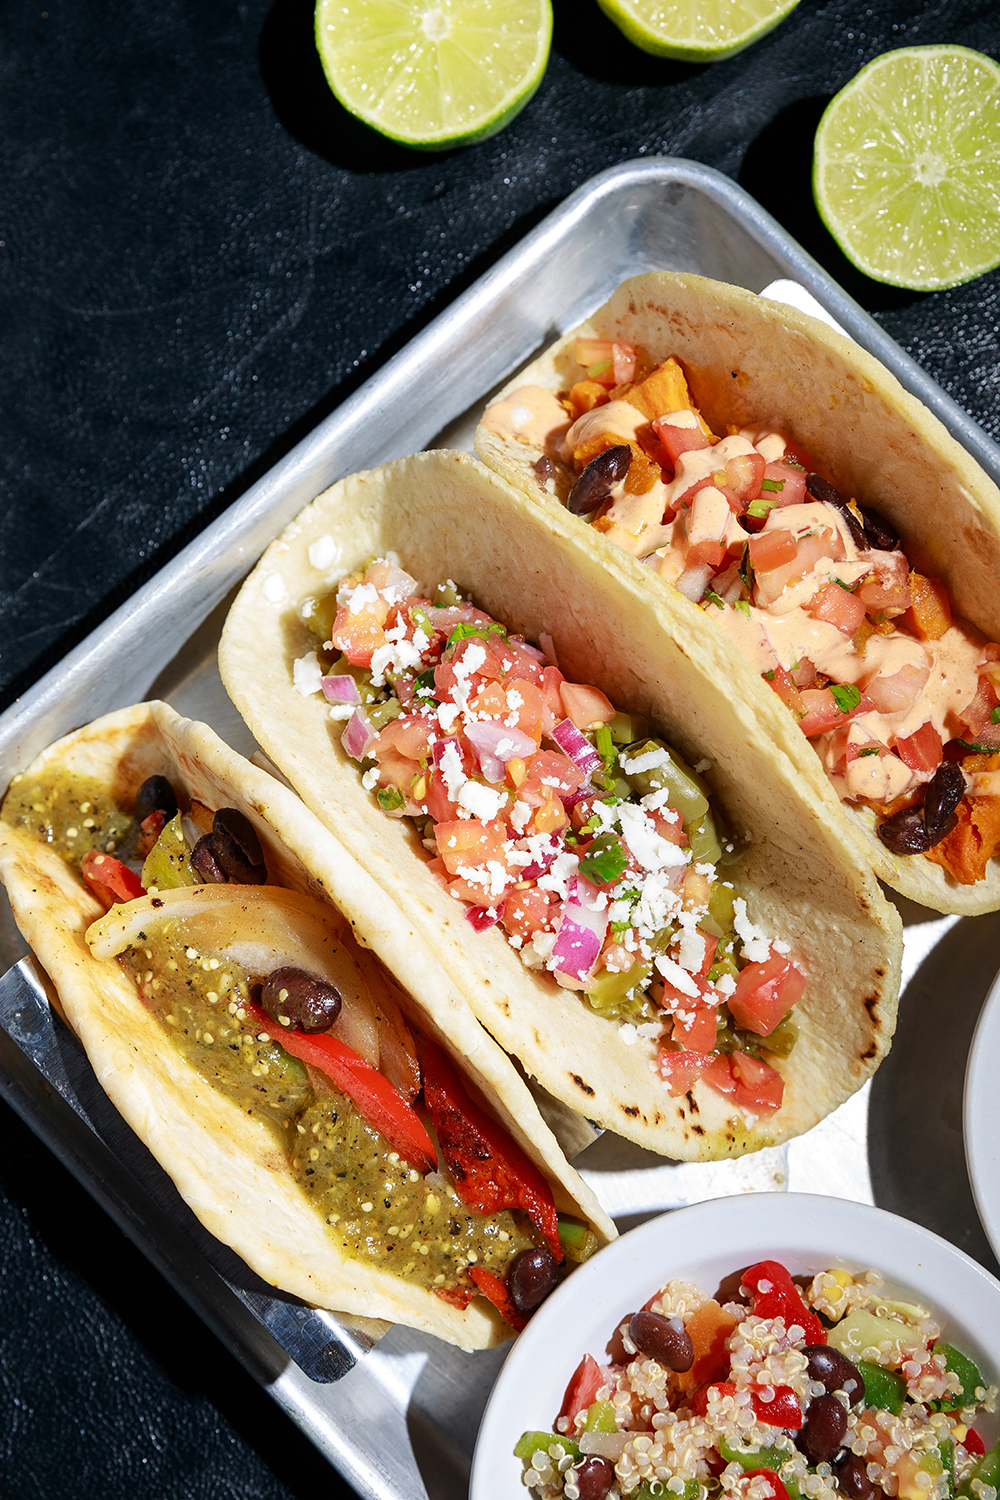 Meat doesn’t have to be the star. Here’s where to find vegetarian tacos ...